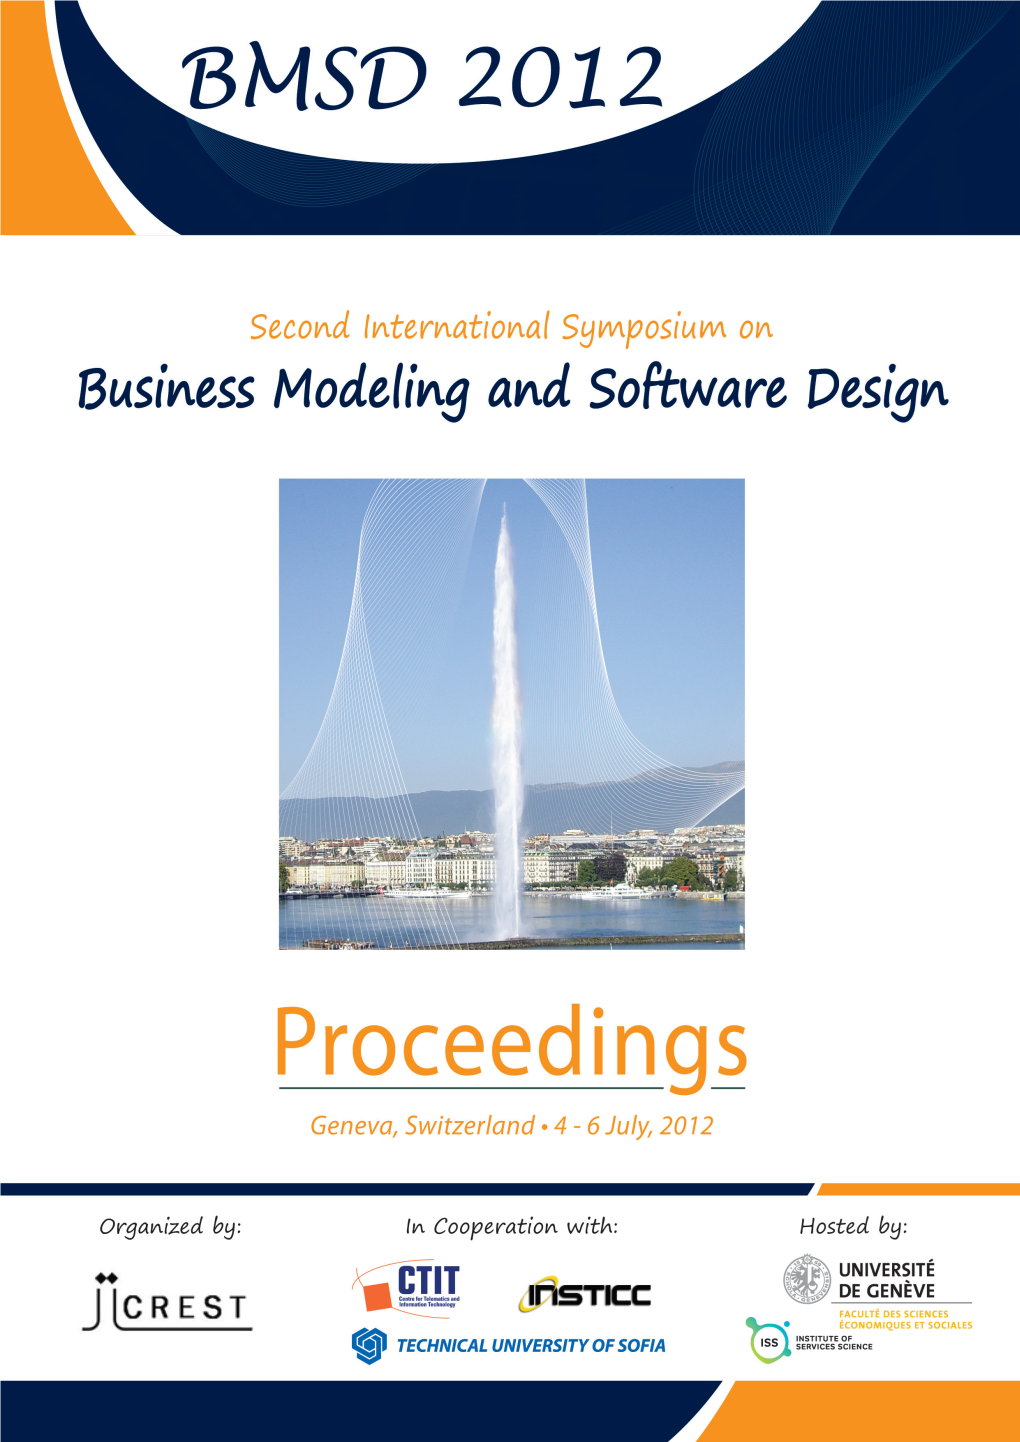 Proceedings of the Second International Symposium on Business Modeling and Software Design